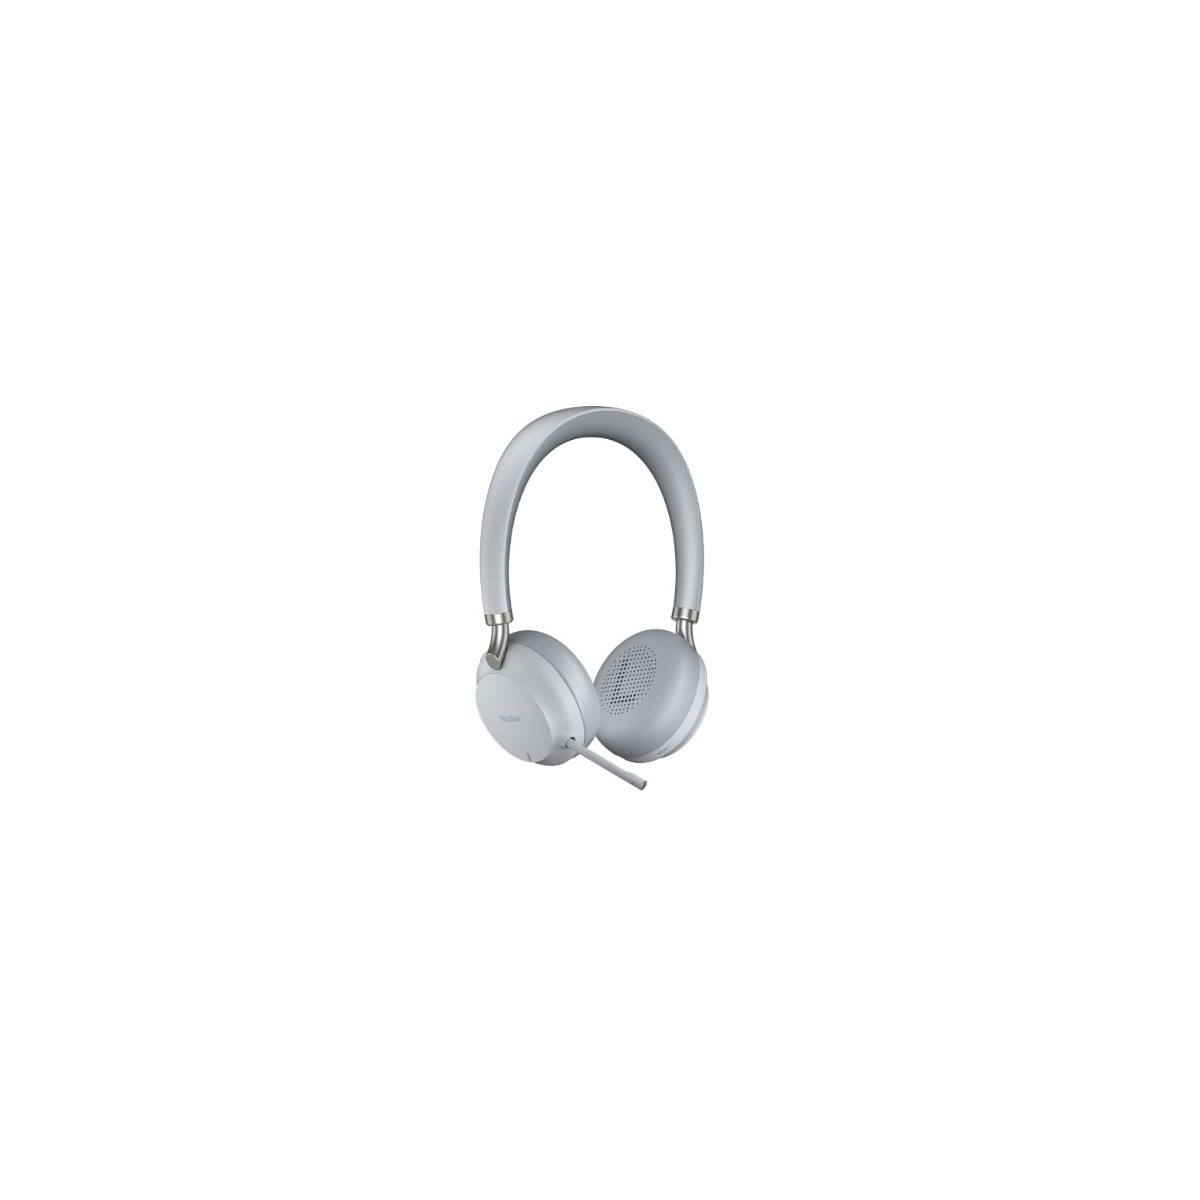 Yealink Bluetooth Headset - BH72 with Charging Stand UC Light Gray USB-A